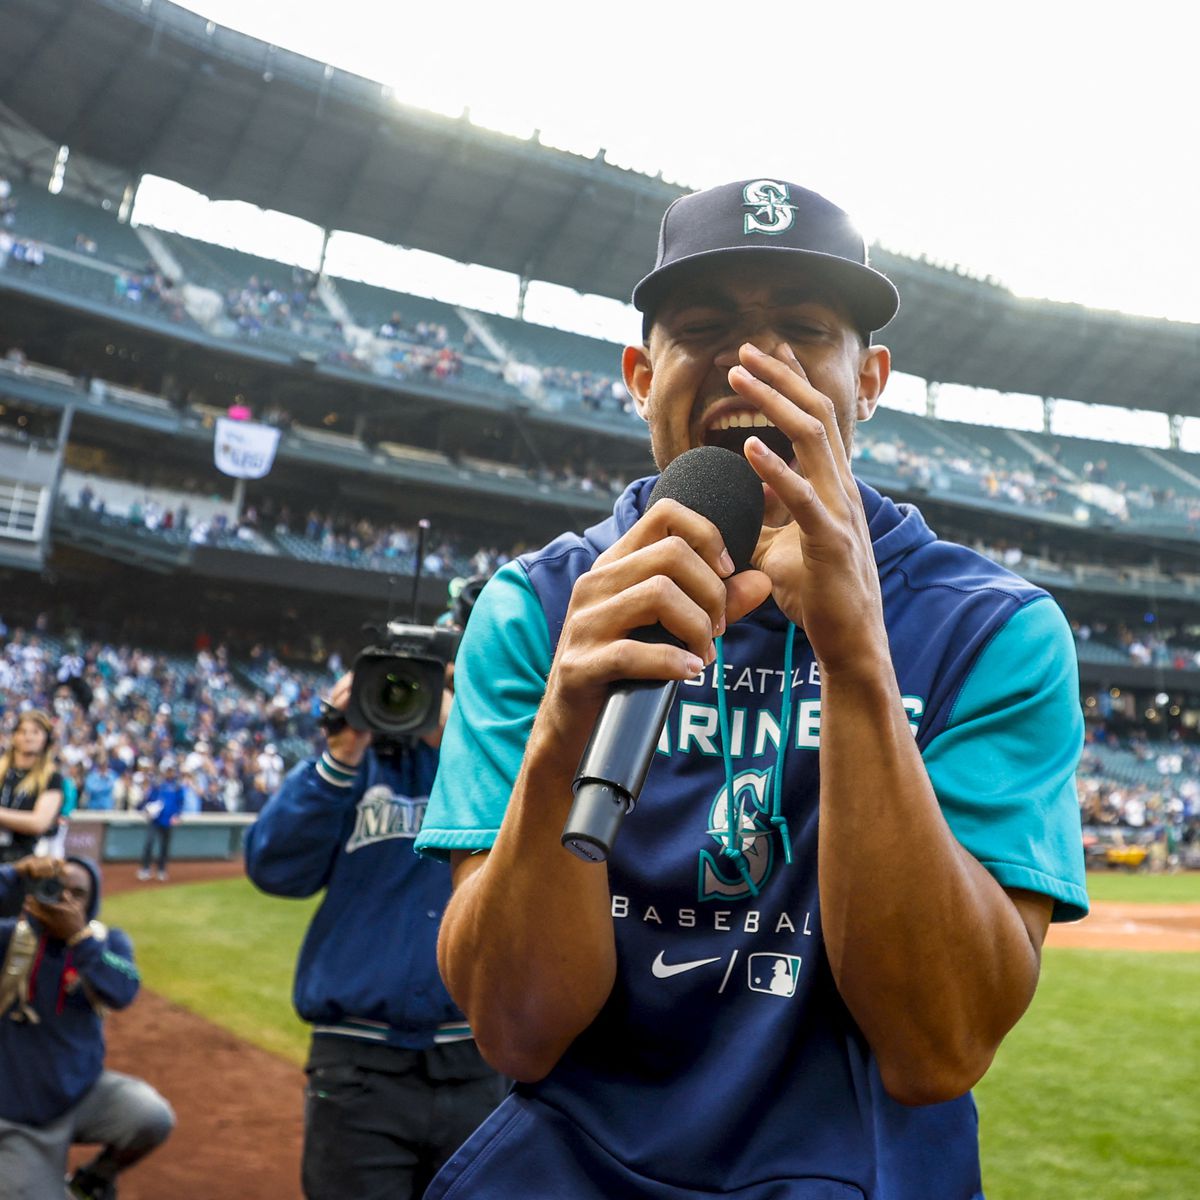 Where the Mariners stand as they eye first playoff berth since